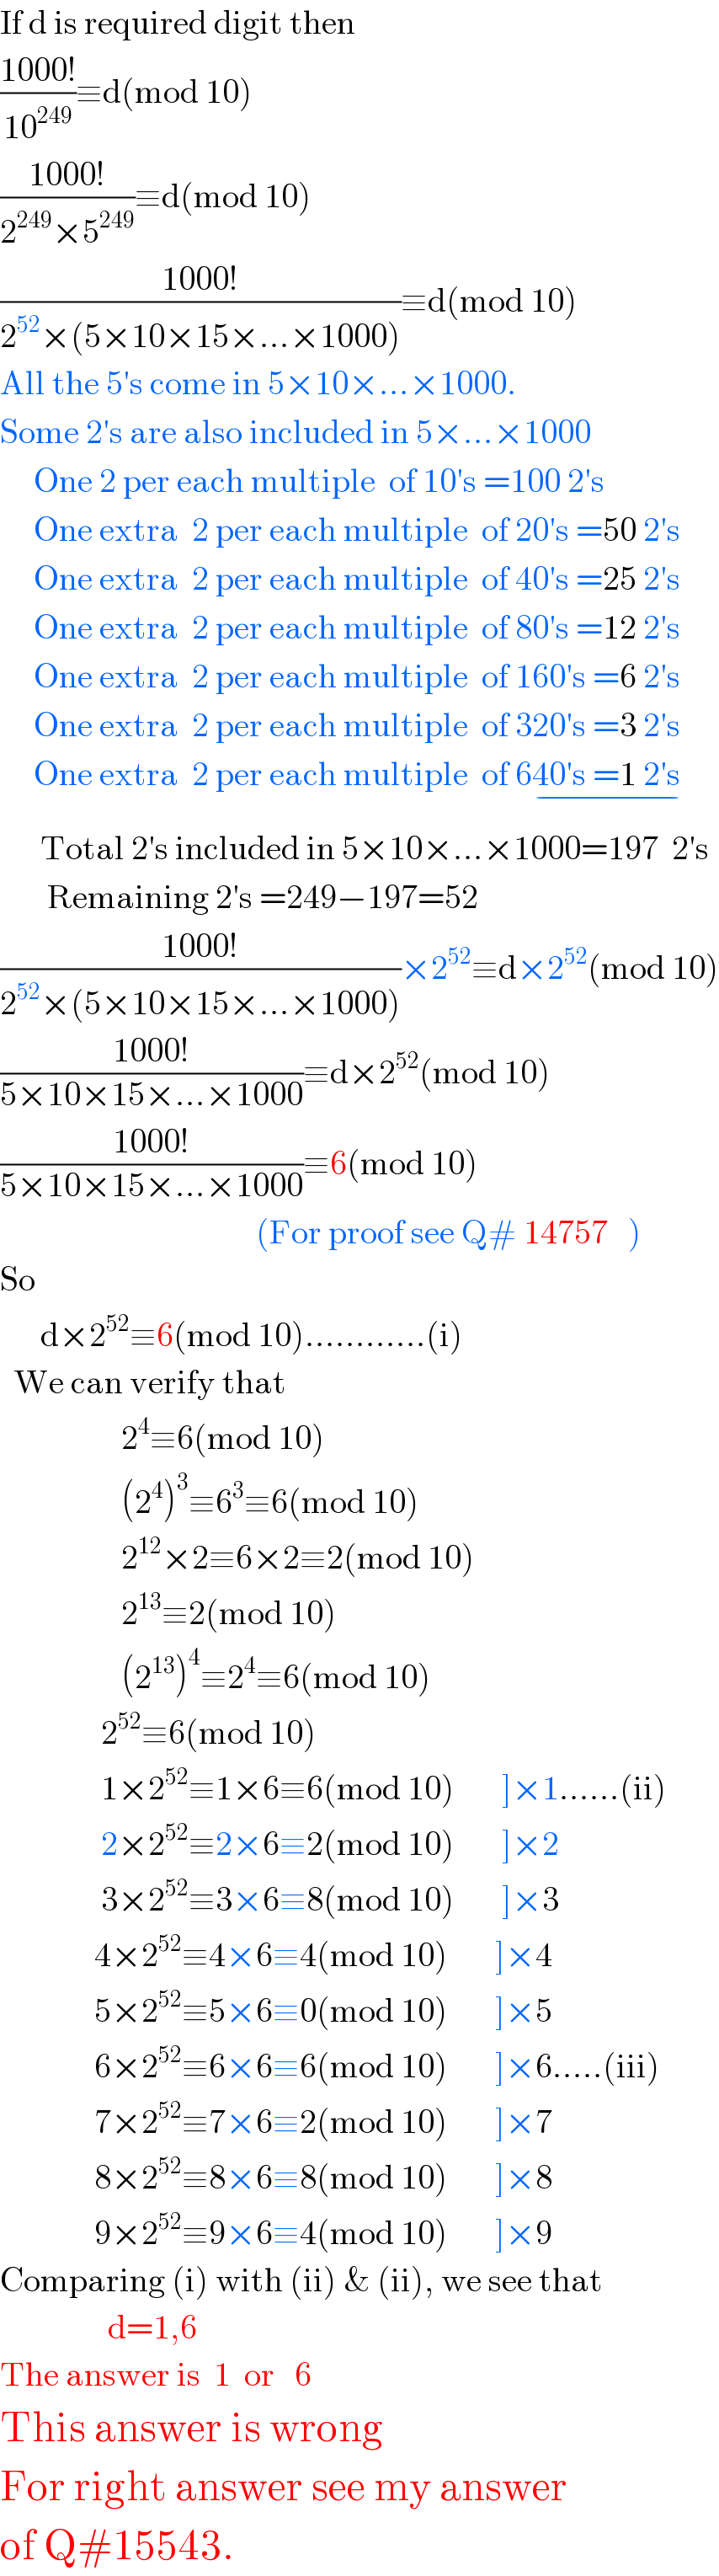 If d is required digit then  ((1000!)/(10^(249) ))≡d(mod 10)  ((1000!)/(2^(249) ×5^(249) ))≡d(mod 10)  ((1000!)/(2^(52) ×(5×10×15×...×1000)))≡d(mod 10)  All the 5′s come in 5×10×...×1000.  Some 2′s are also included in 5×...×1000       One 2 per each multiple  of 10′s =100 2′s       One extra  2 per each multiple  of 20′s =50 2′s       One extra  2 per each multiple  of 40′s =25 2′s       One extra  2 per each multiple  of 80′s =12 2′s       One extra  2 per each multiple  of 160′s =6 2′s       One extra  2 per each multiple  of 320′s =3 2′s       One extra  2 per each multiple  of 640′s =1 2′s    _(−)         Total 2′s included in 5×10×...×1000=197  2′s         Remaining 2′s =249−197=52  ((1000!)/(2^(52) ×(5×10×15×...×1000)))×2^(52) ≡d×2^(52) (mod 10)  ((1000!)/(5×10×15×...×1000))≡d×2^(52) (mod 10)  ((1000!)/(5×10×15×...×1000))≡6(mod 10)                                         (For proof see Q# 14757   )  So        d×2^(52) ≡6(mod 10)............(i)    We can verify that                    2^4 ≡6(mod 10)                    (2^4 )^3 ≡6^3 ≡6(mod 10)                    2^(12) ×2≡6×2≡2(mod 10)                    2^(13) ≡2(mod 10)                    (2^(13) )^4 ≡2^4 ≡6(mod 10)                 2^(52) ≡6(mod 10)                 1×2^(52) ≡1×6≡6(mod 10)       ]×1......(ii)                 2×2^(52) ≡2×6≡2(mod 10)       ]×2                 3×2^(52) ≡3×6≡8(mod 10)       ]×3                4×2^(52) ≡4×6≡4(mod 10)       ]×4                5×2^(52) ≡5×6≡0(mod 10)       ]×5                6×2^(52) ≡6×6≡6(mod 10)       ]×6.....(iii)                7×2^(52) ≡7×6≡2(mod 10)       ]×7                8×2^(52) ≡8×6≡8(mod 10)       ]×8                9×2^(52) ≡9×6≡4(mod 10)       ]×9  Comparing (i) with (ii) & (ii), we see that                  d=1,6  The answer is  1  or   6  This answer is wrong  For right answer see my answer  of Q#15543.  